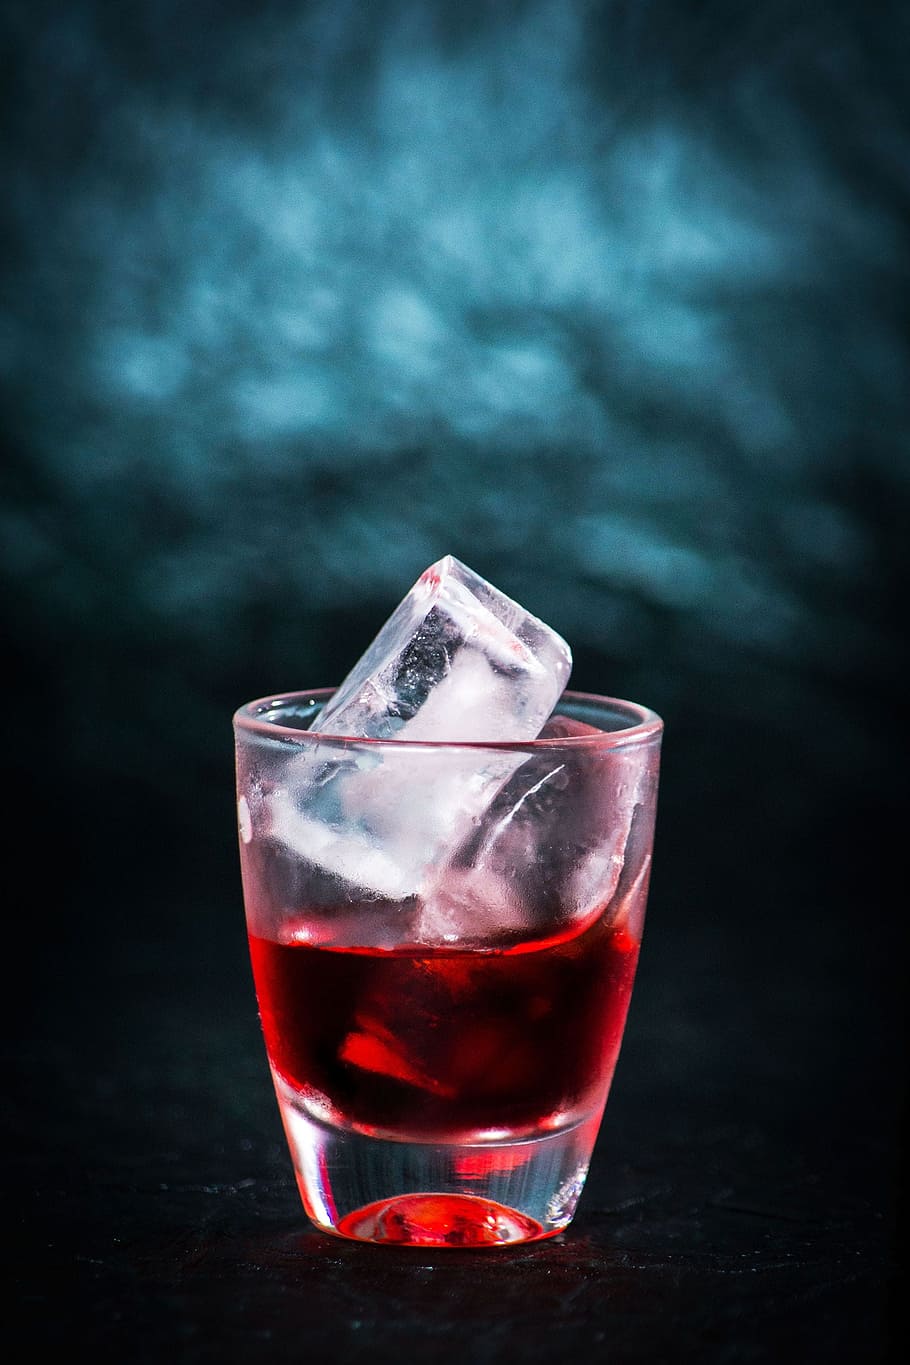 red, wine, ice, clear, Drink, Alcohol, Beverage, Party, alcohol, beverage, cocktail